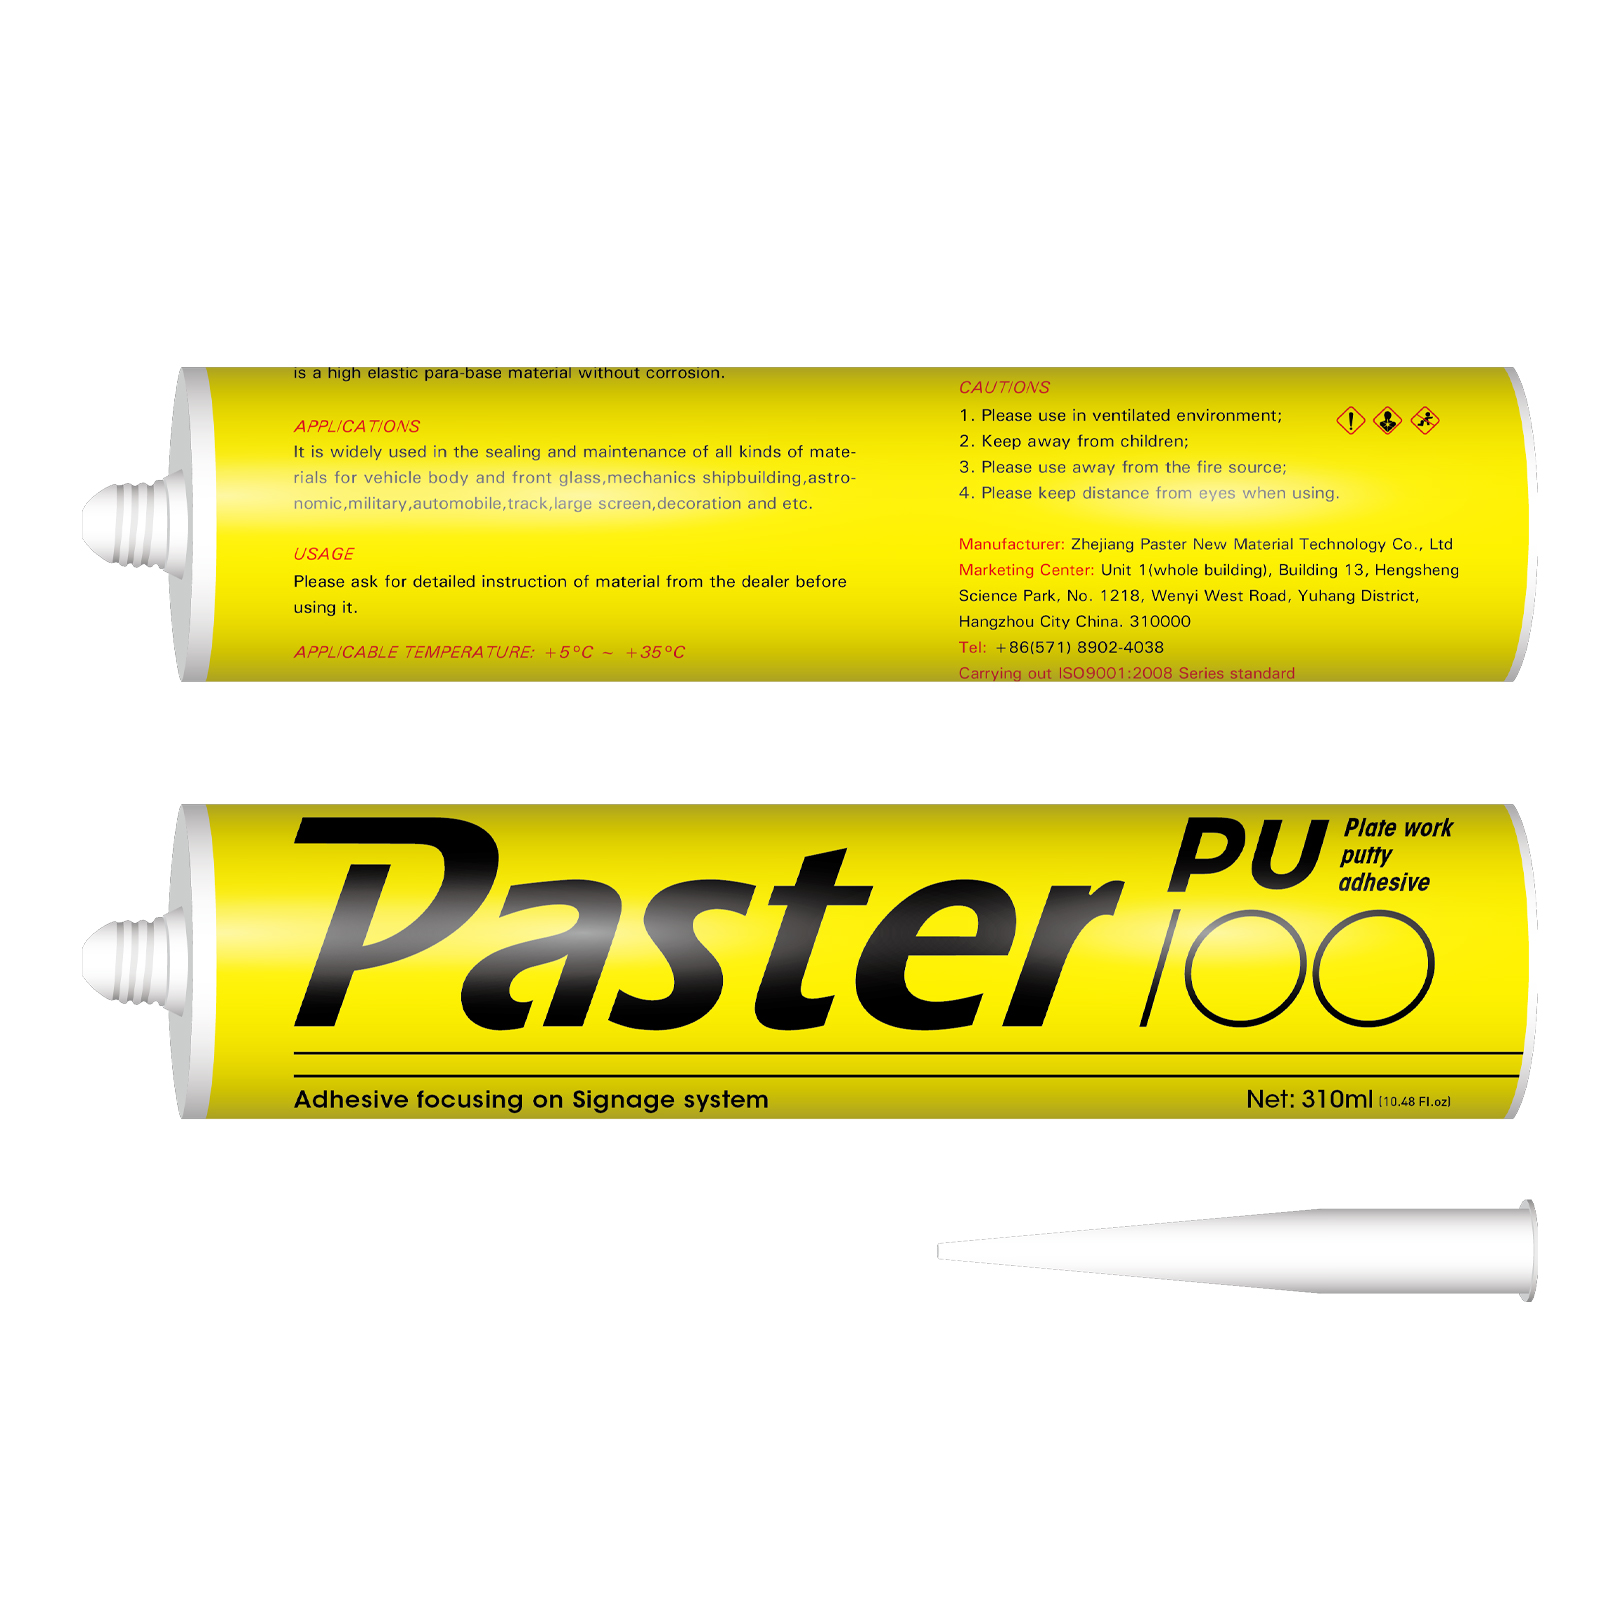 PU-100 Sheet Metal & Putty Adhesive for Channel Letter